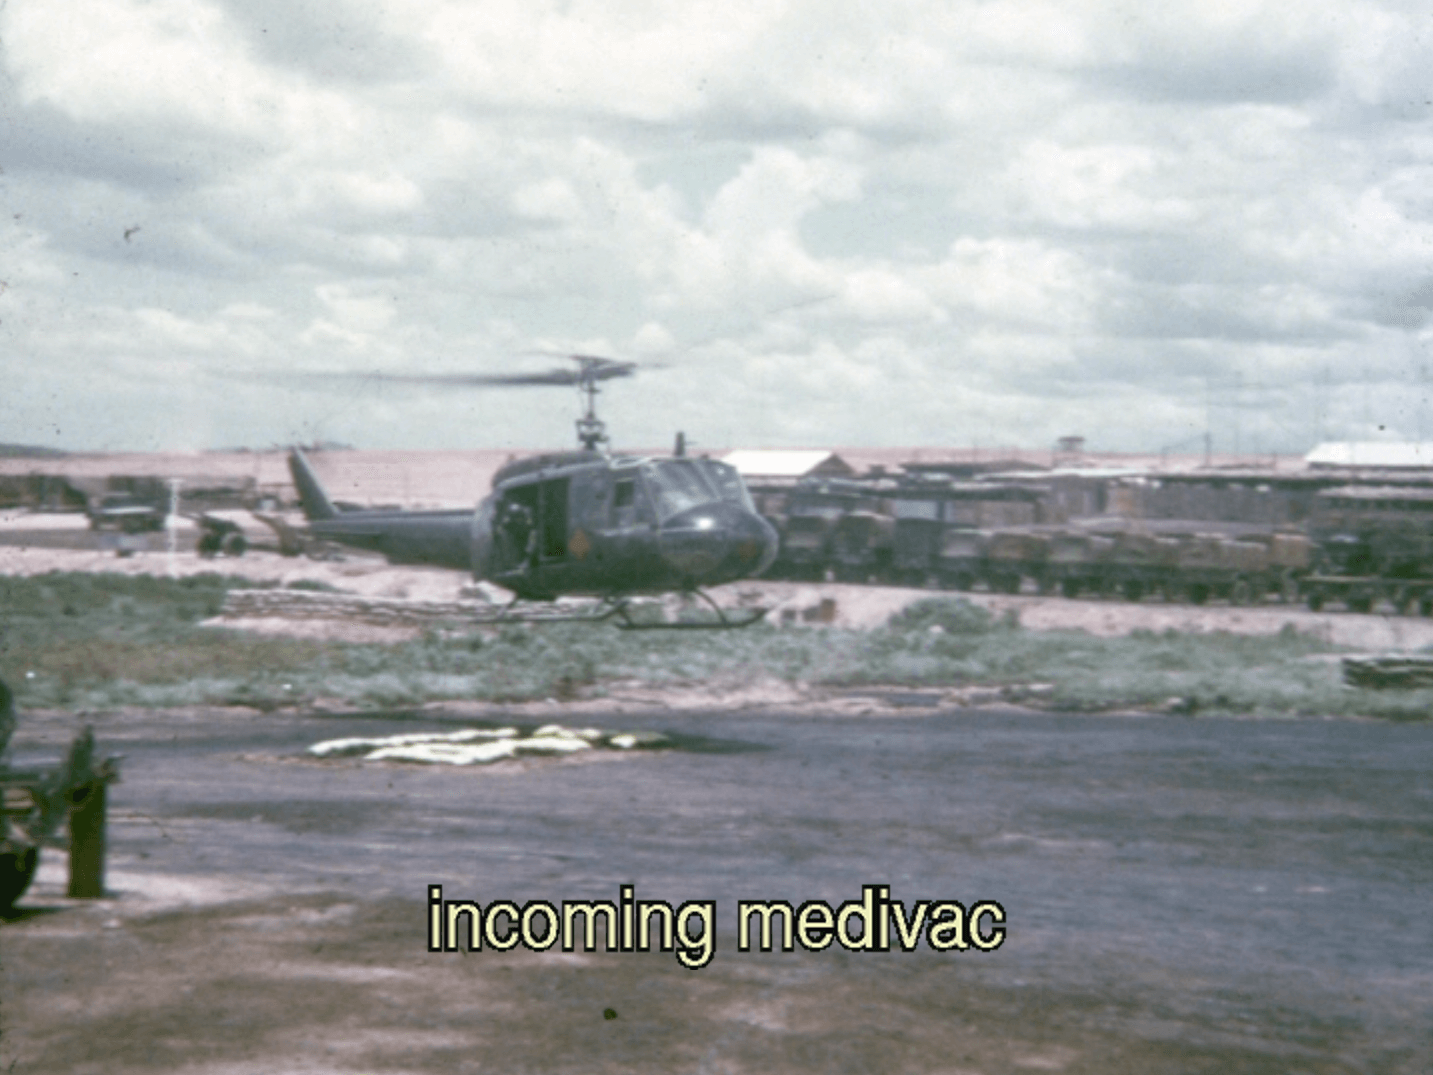 A helicopter outside an encampment. Text on photo says "incoming medivac."